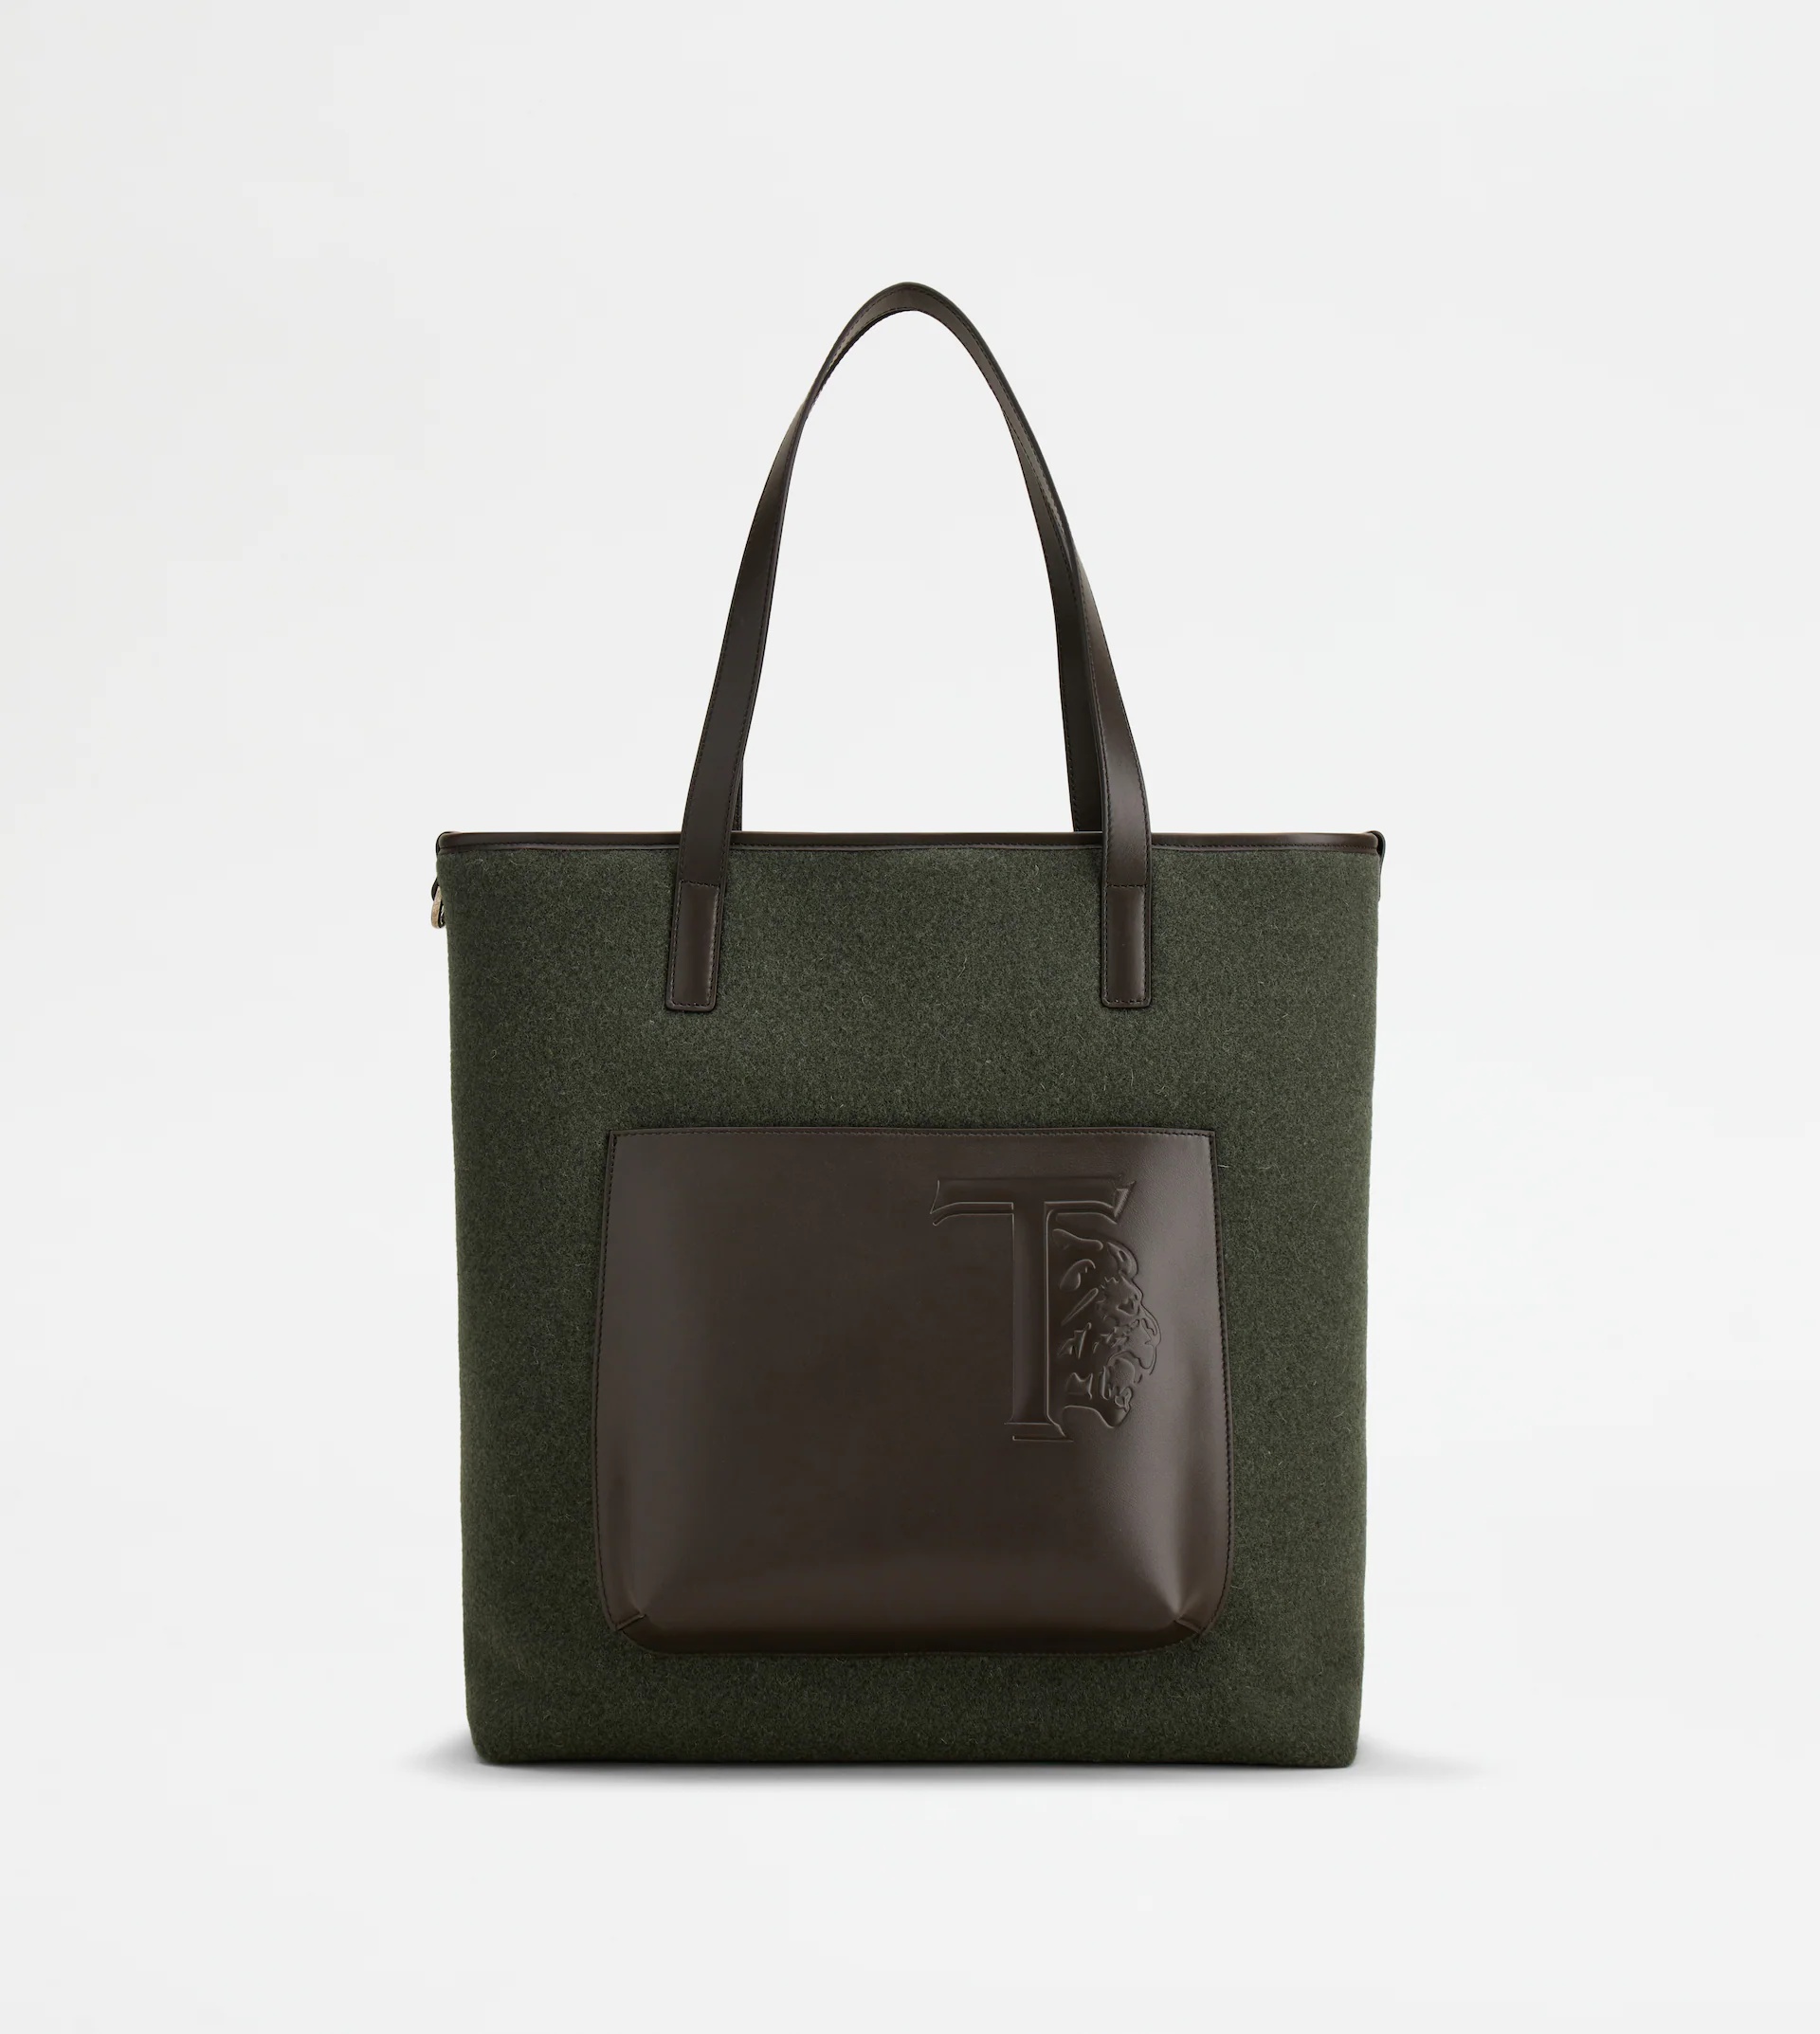 SHOPPING BAG IN FELT AND LEATHER MEDIUM - GREEN, BROWN - 1